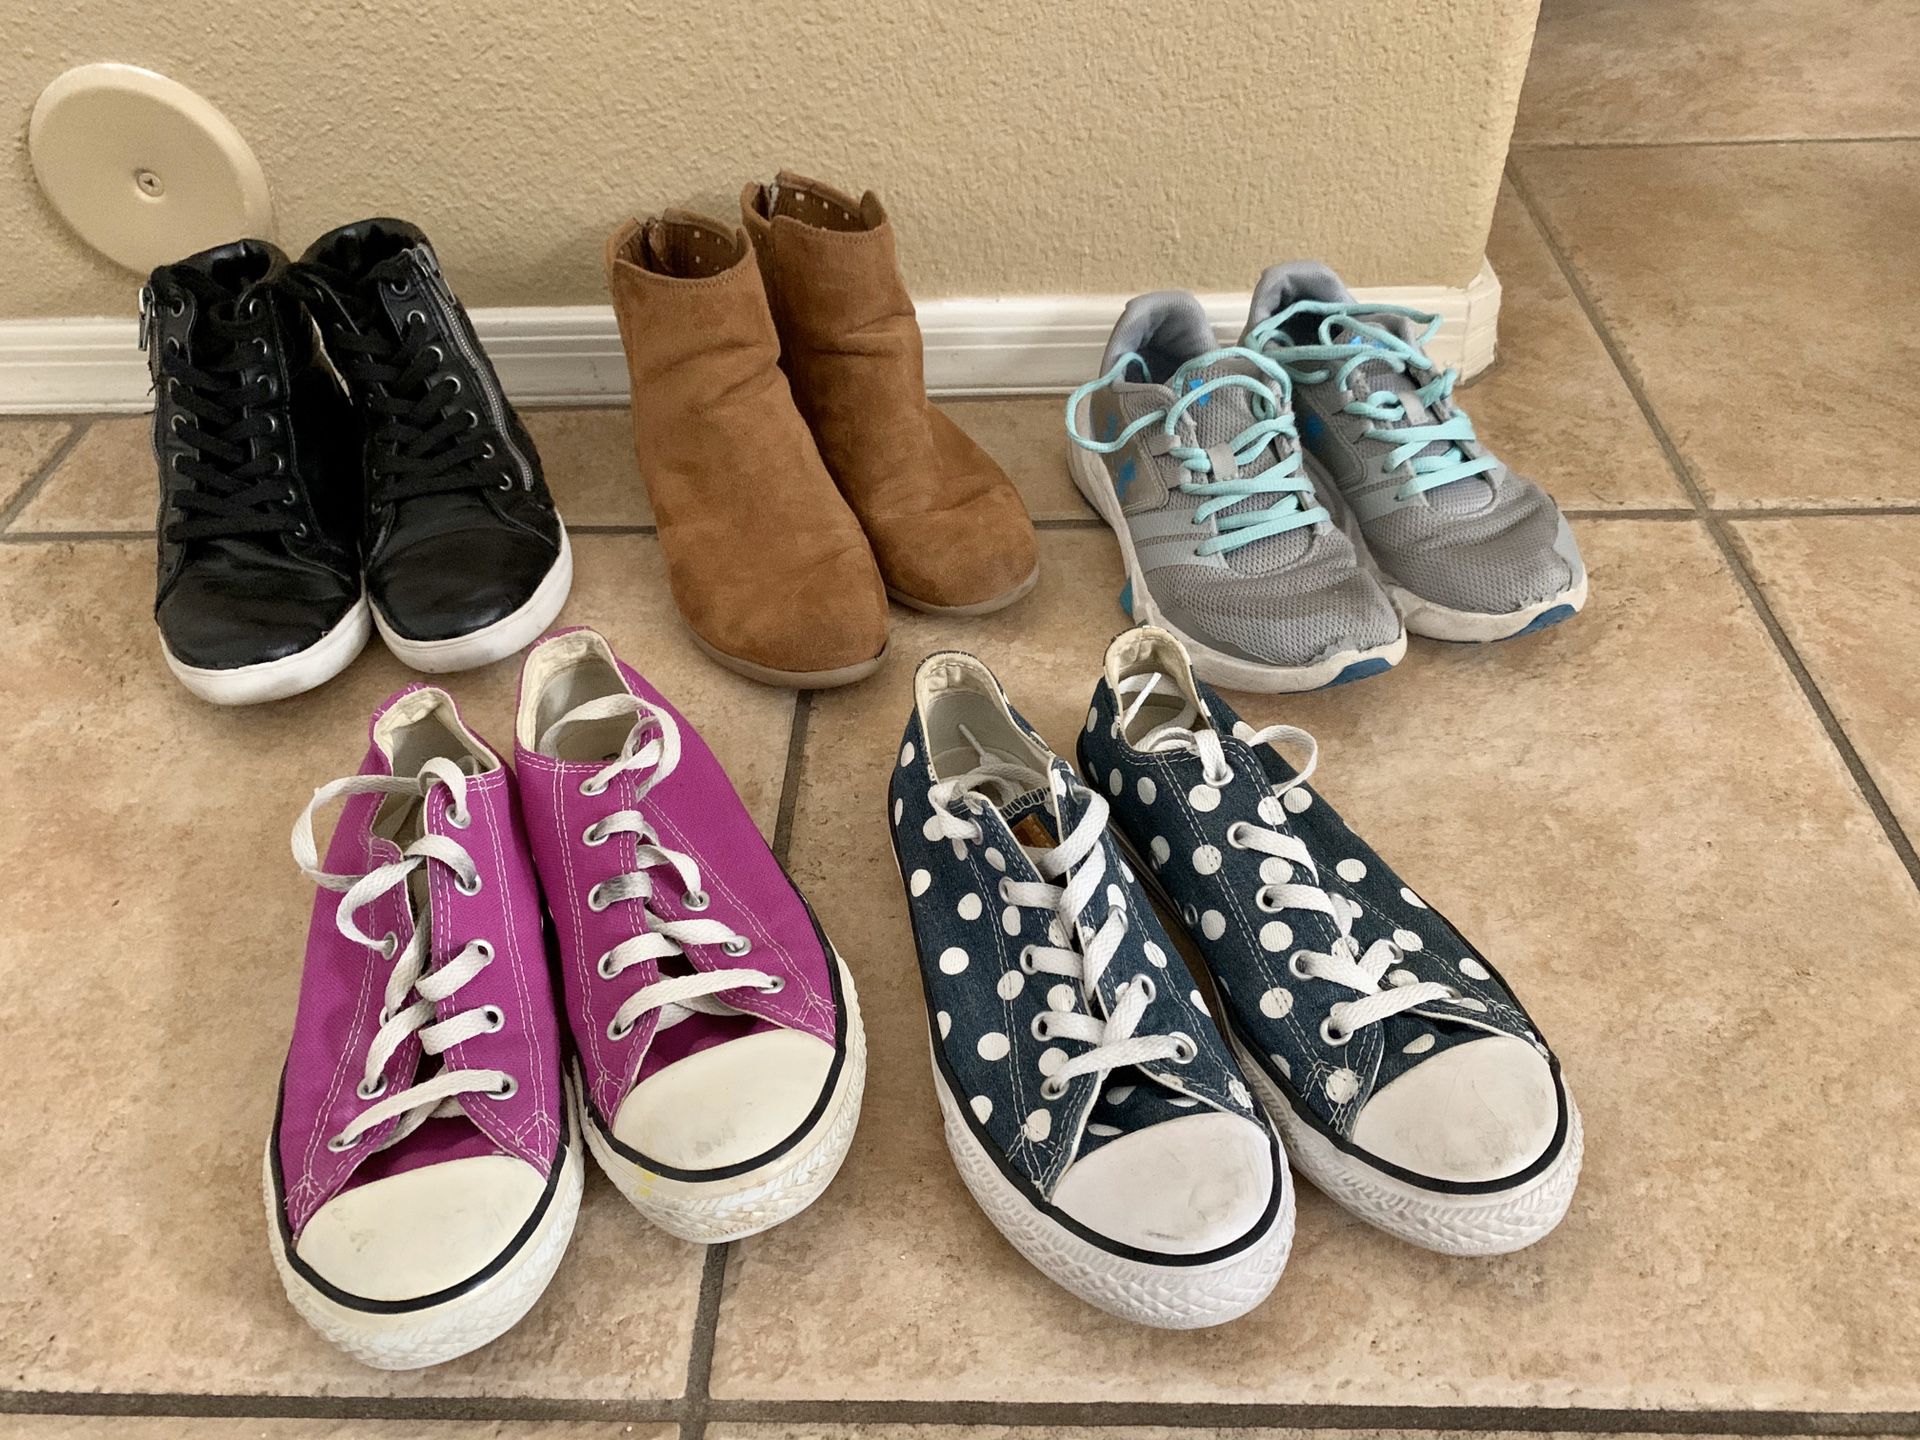 Lot of Girl’s youth sz 3 Shoes